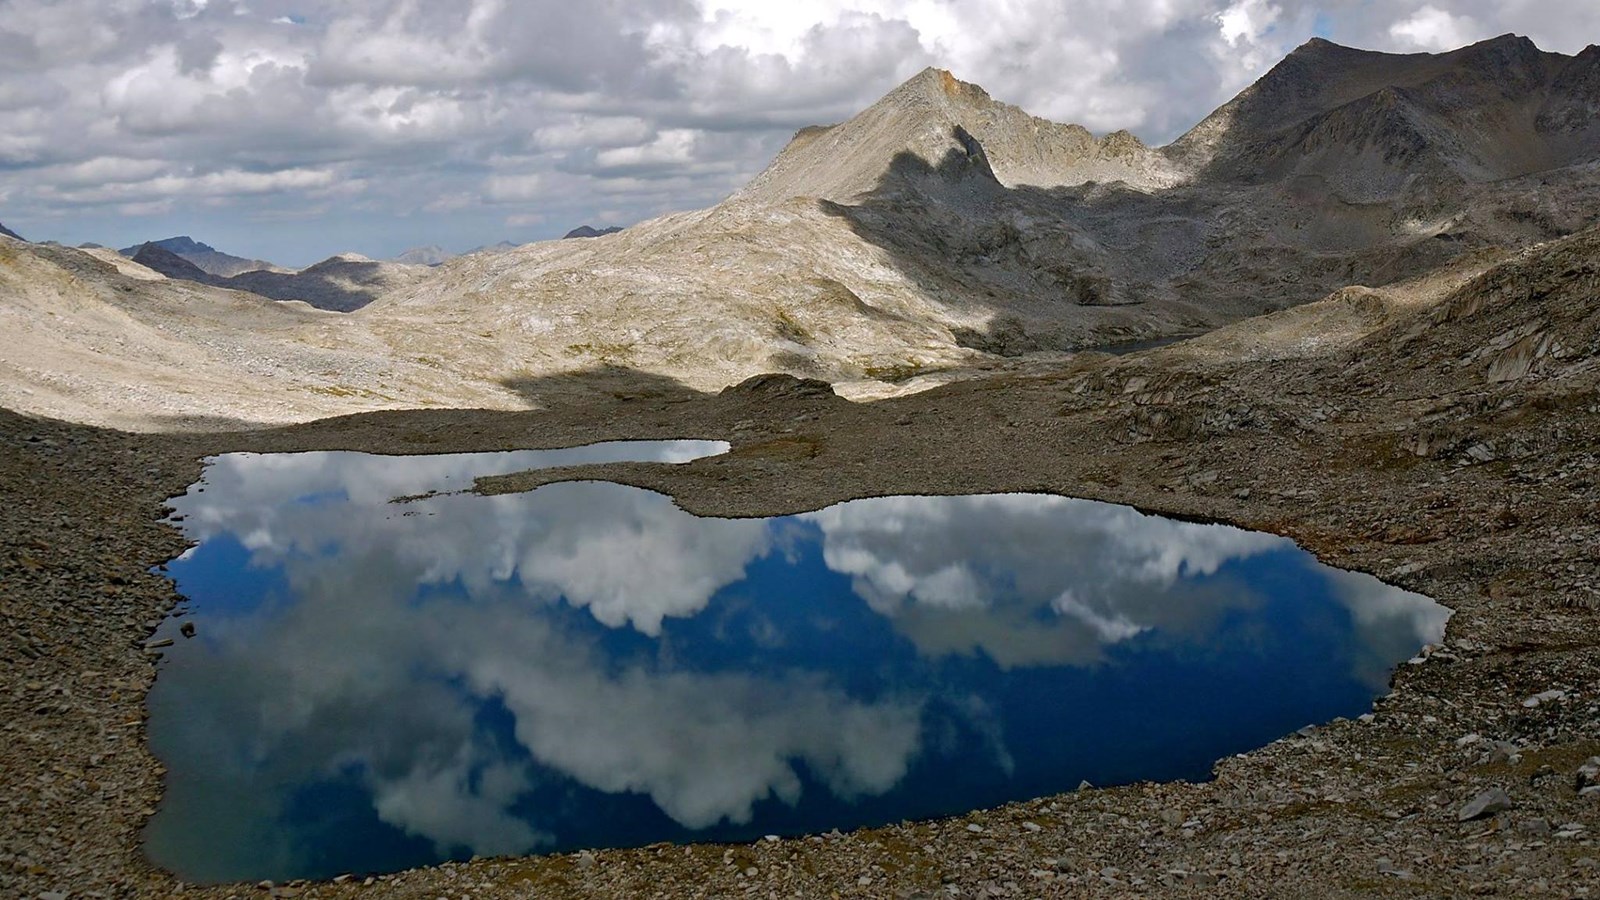 Clouds reflect off a blue alpine lake nestled in high sierra peaks of Kings Canyon.